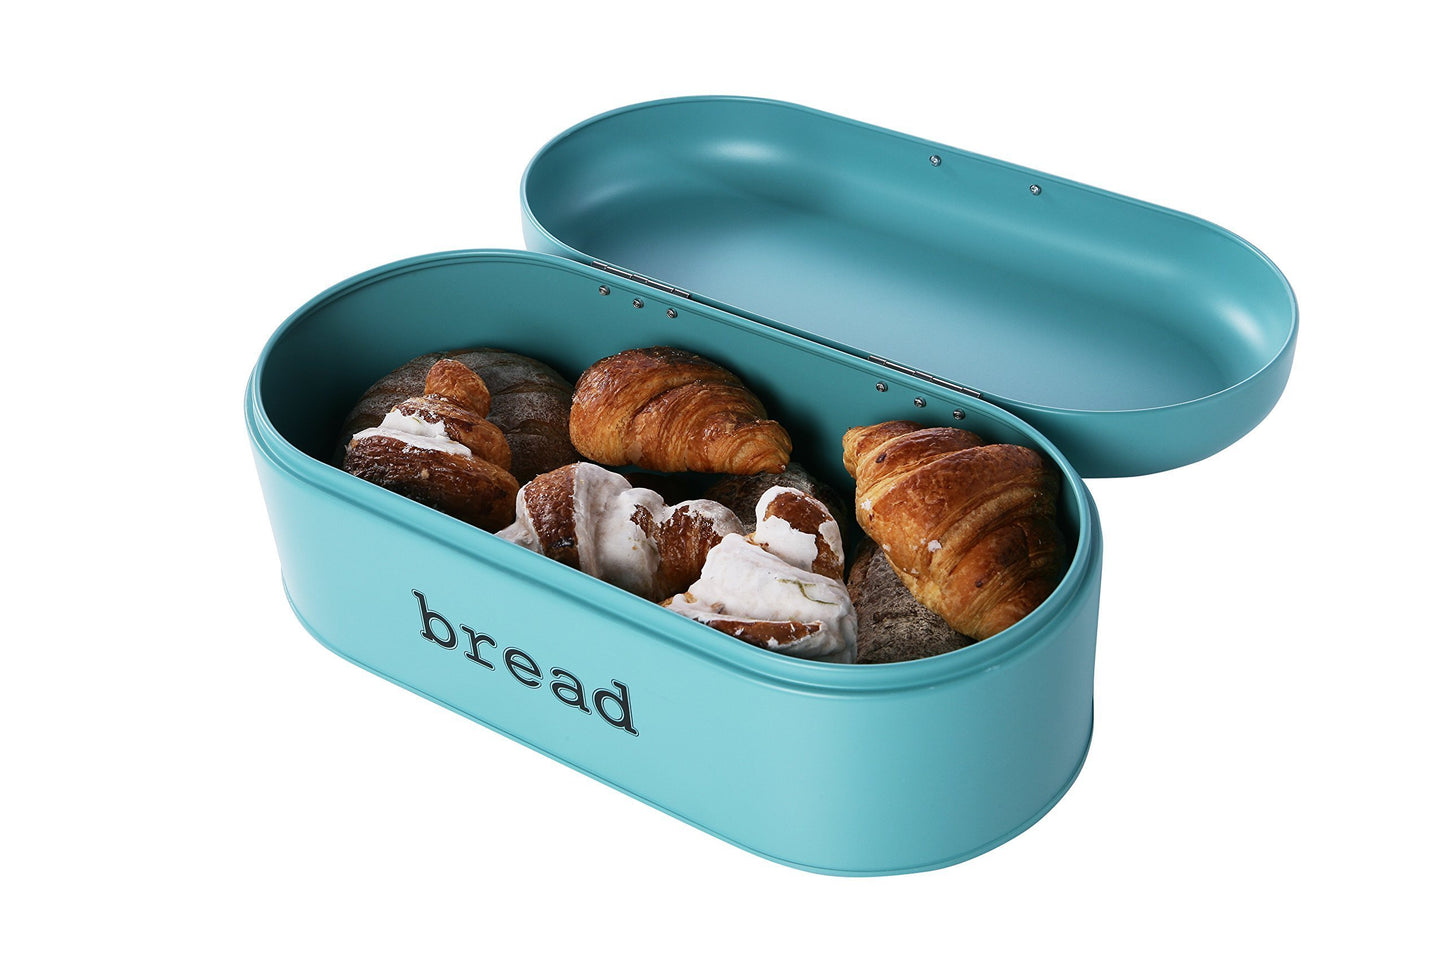 New large bread box for kitchen counter bread bin storage container with lid metal vintage retro design for loaves sliced bread pastries teal 17 x 9 x 6 inches